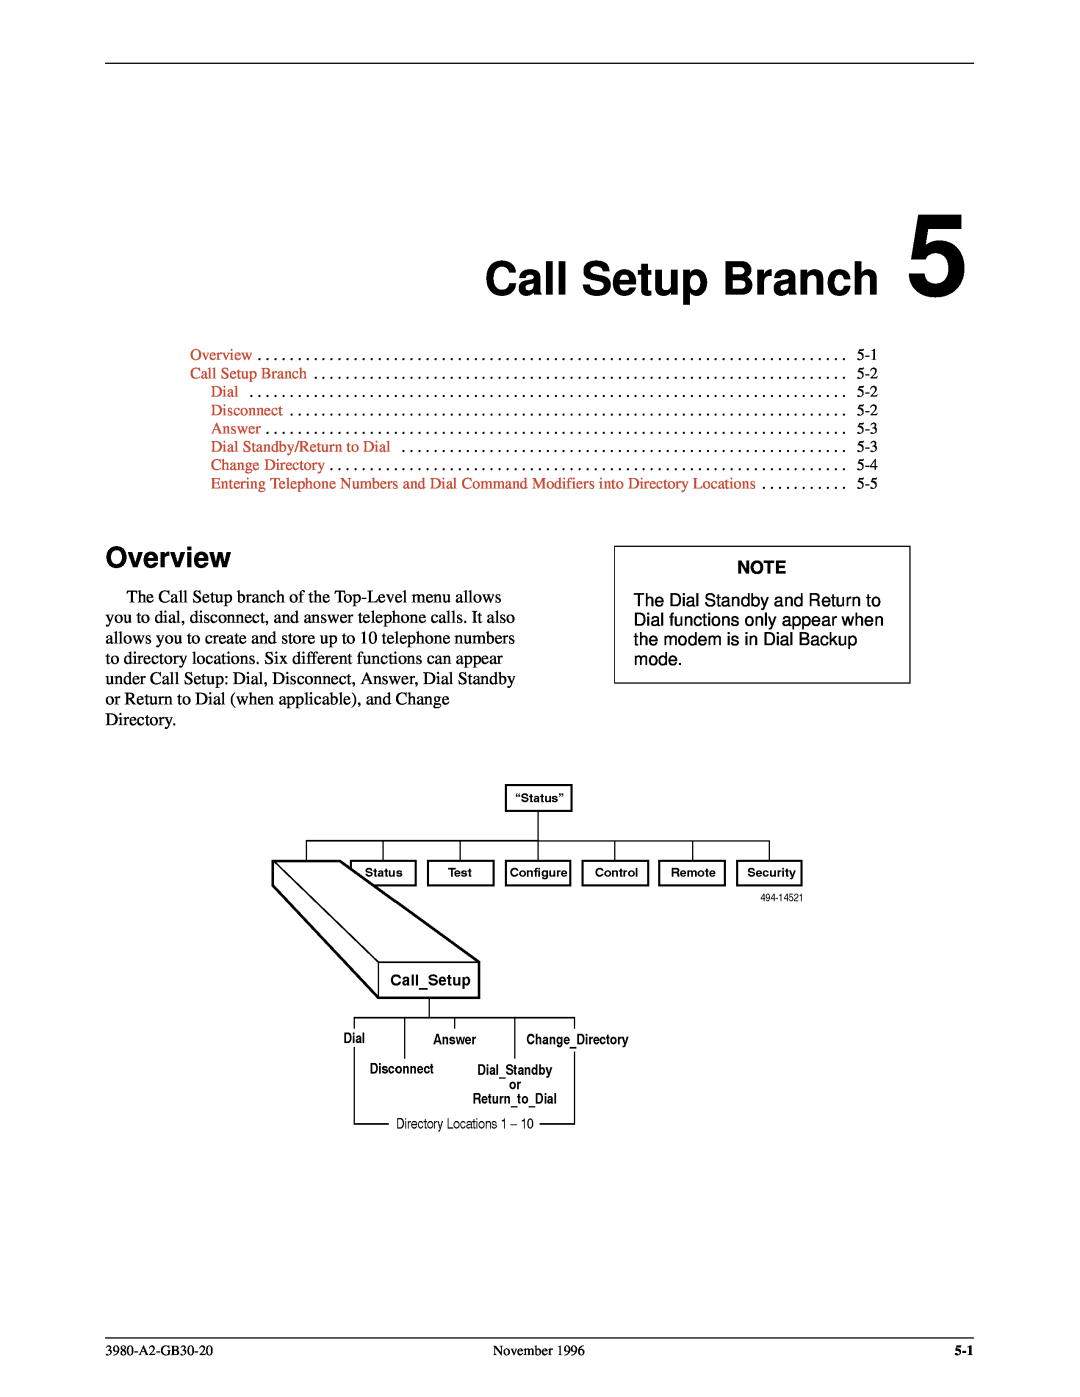 Paradyne 3800PLUS manual Call Setup Branch, Overview 